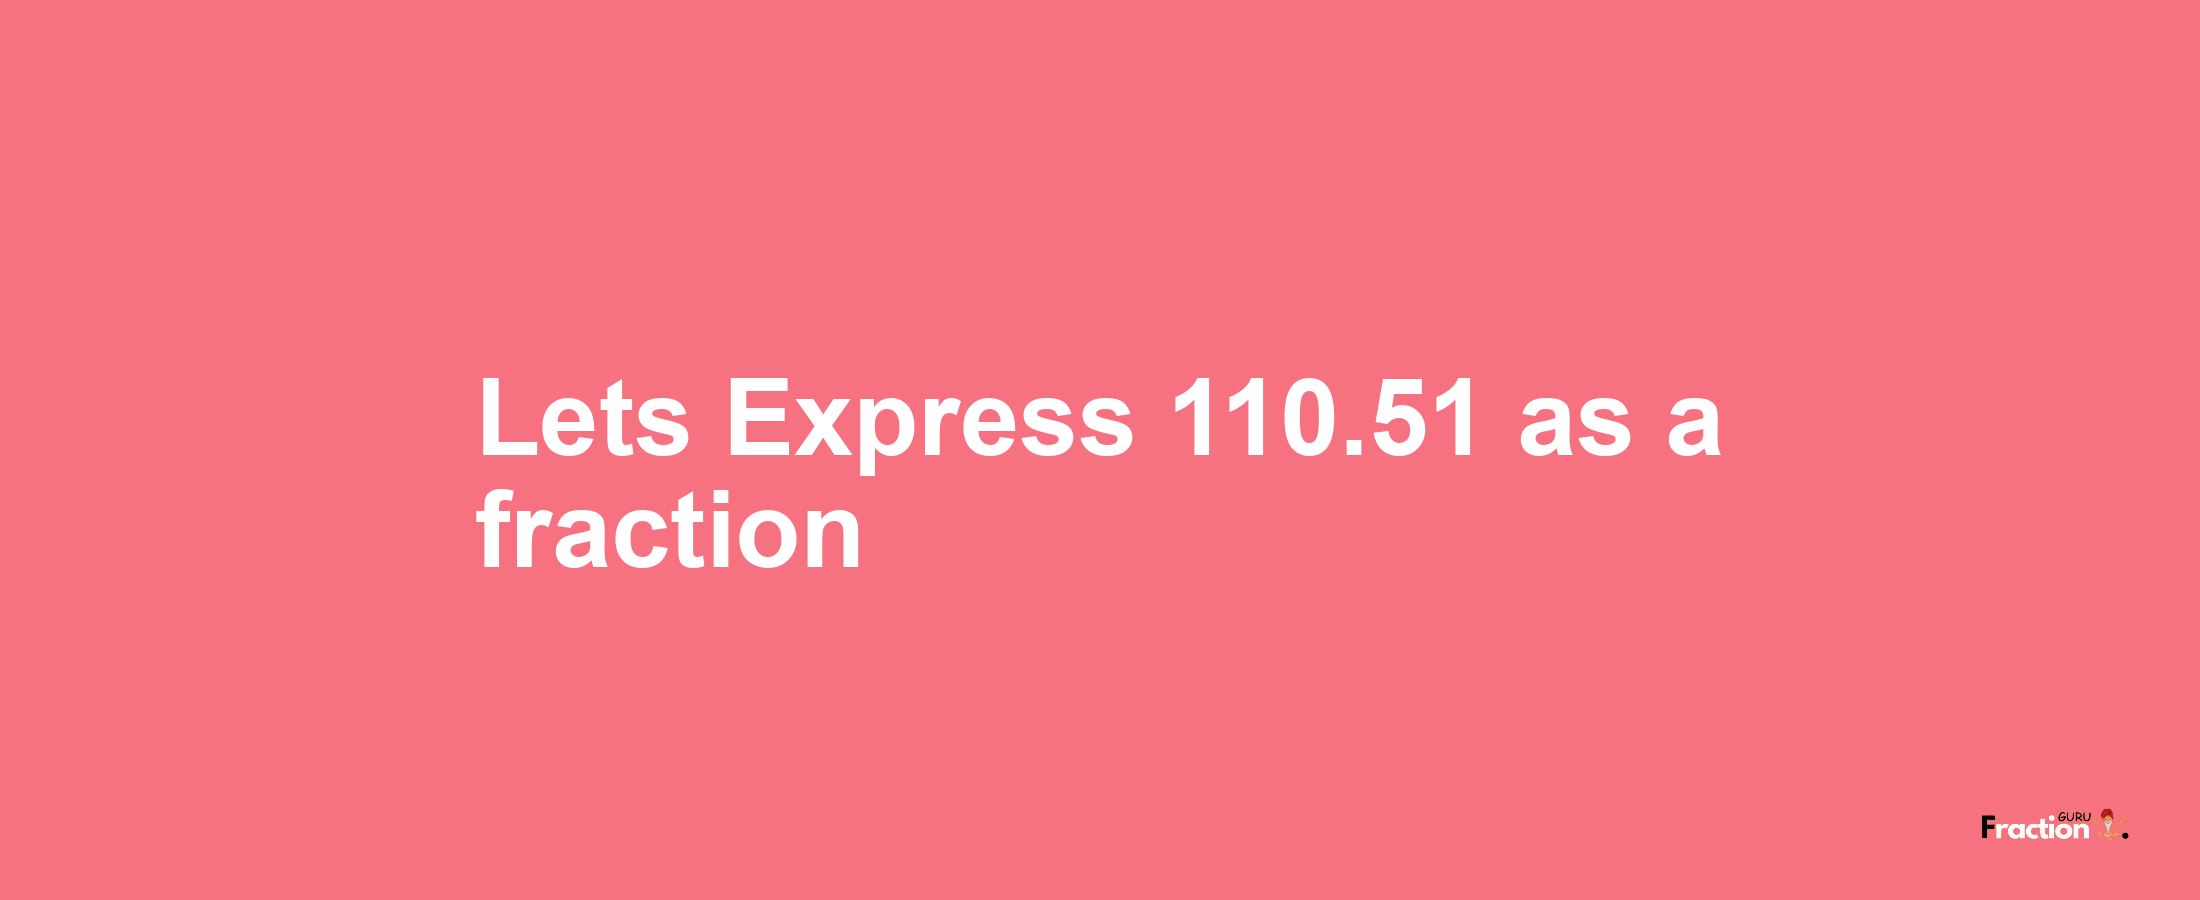 Lets Express 110.51 as afraction